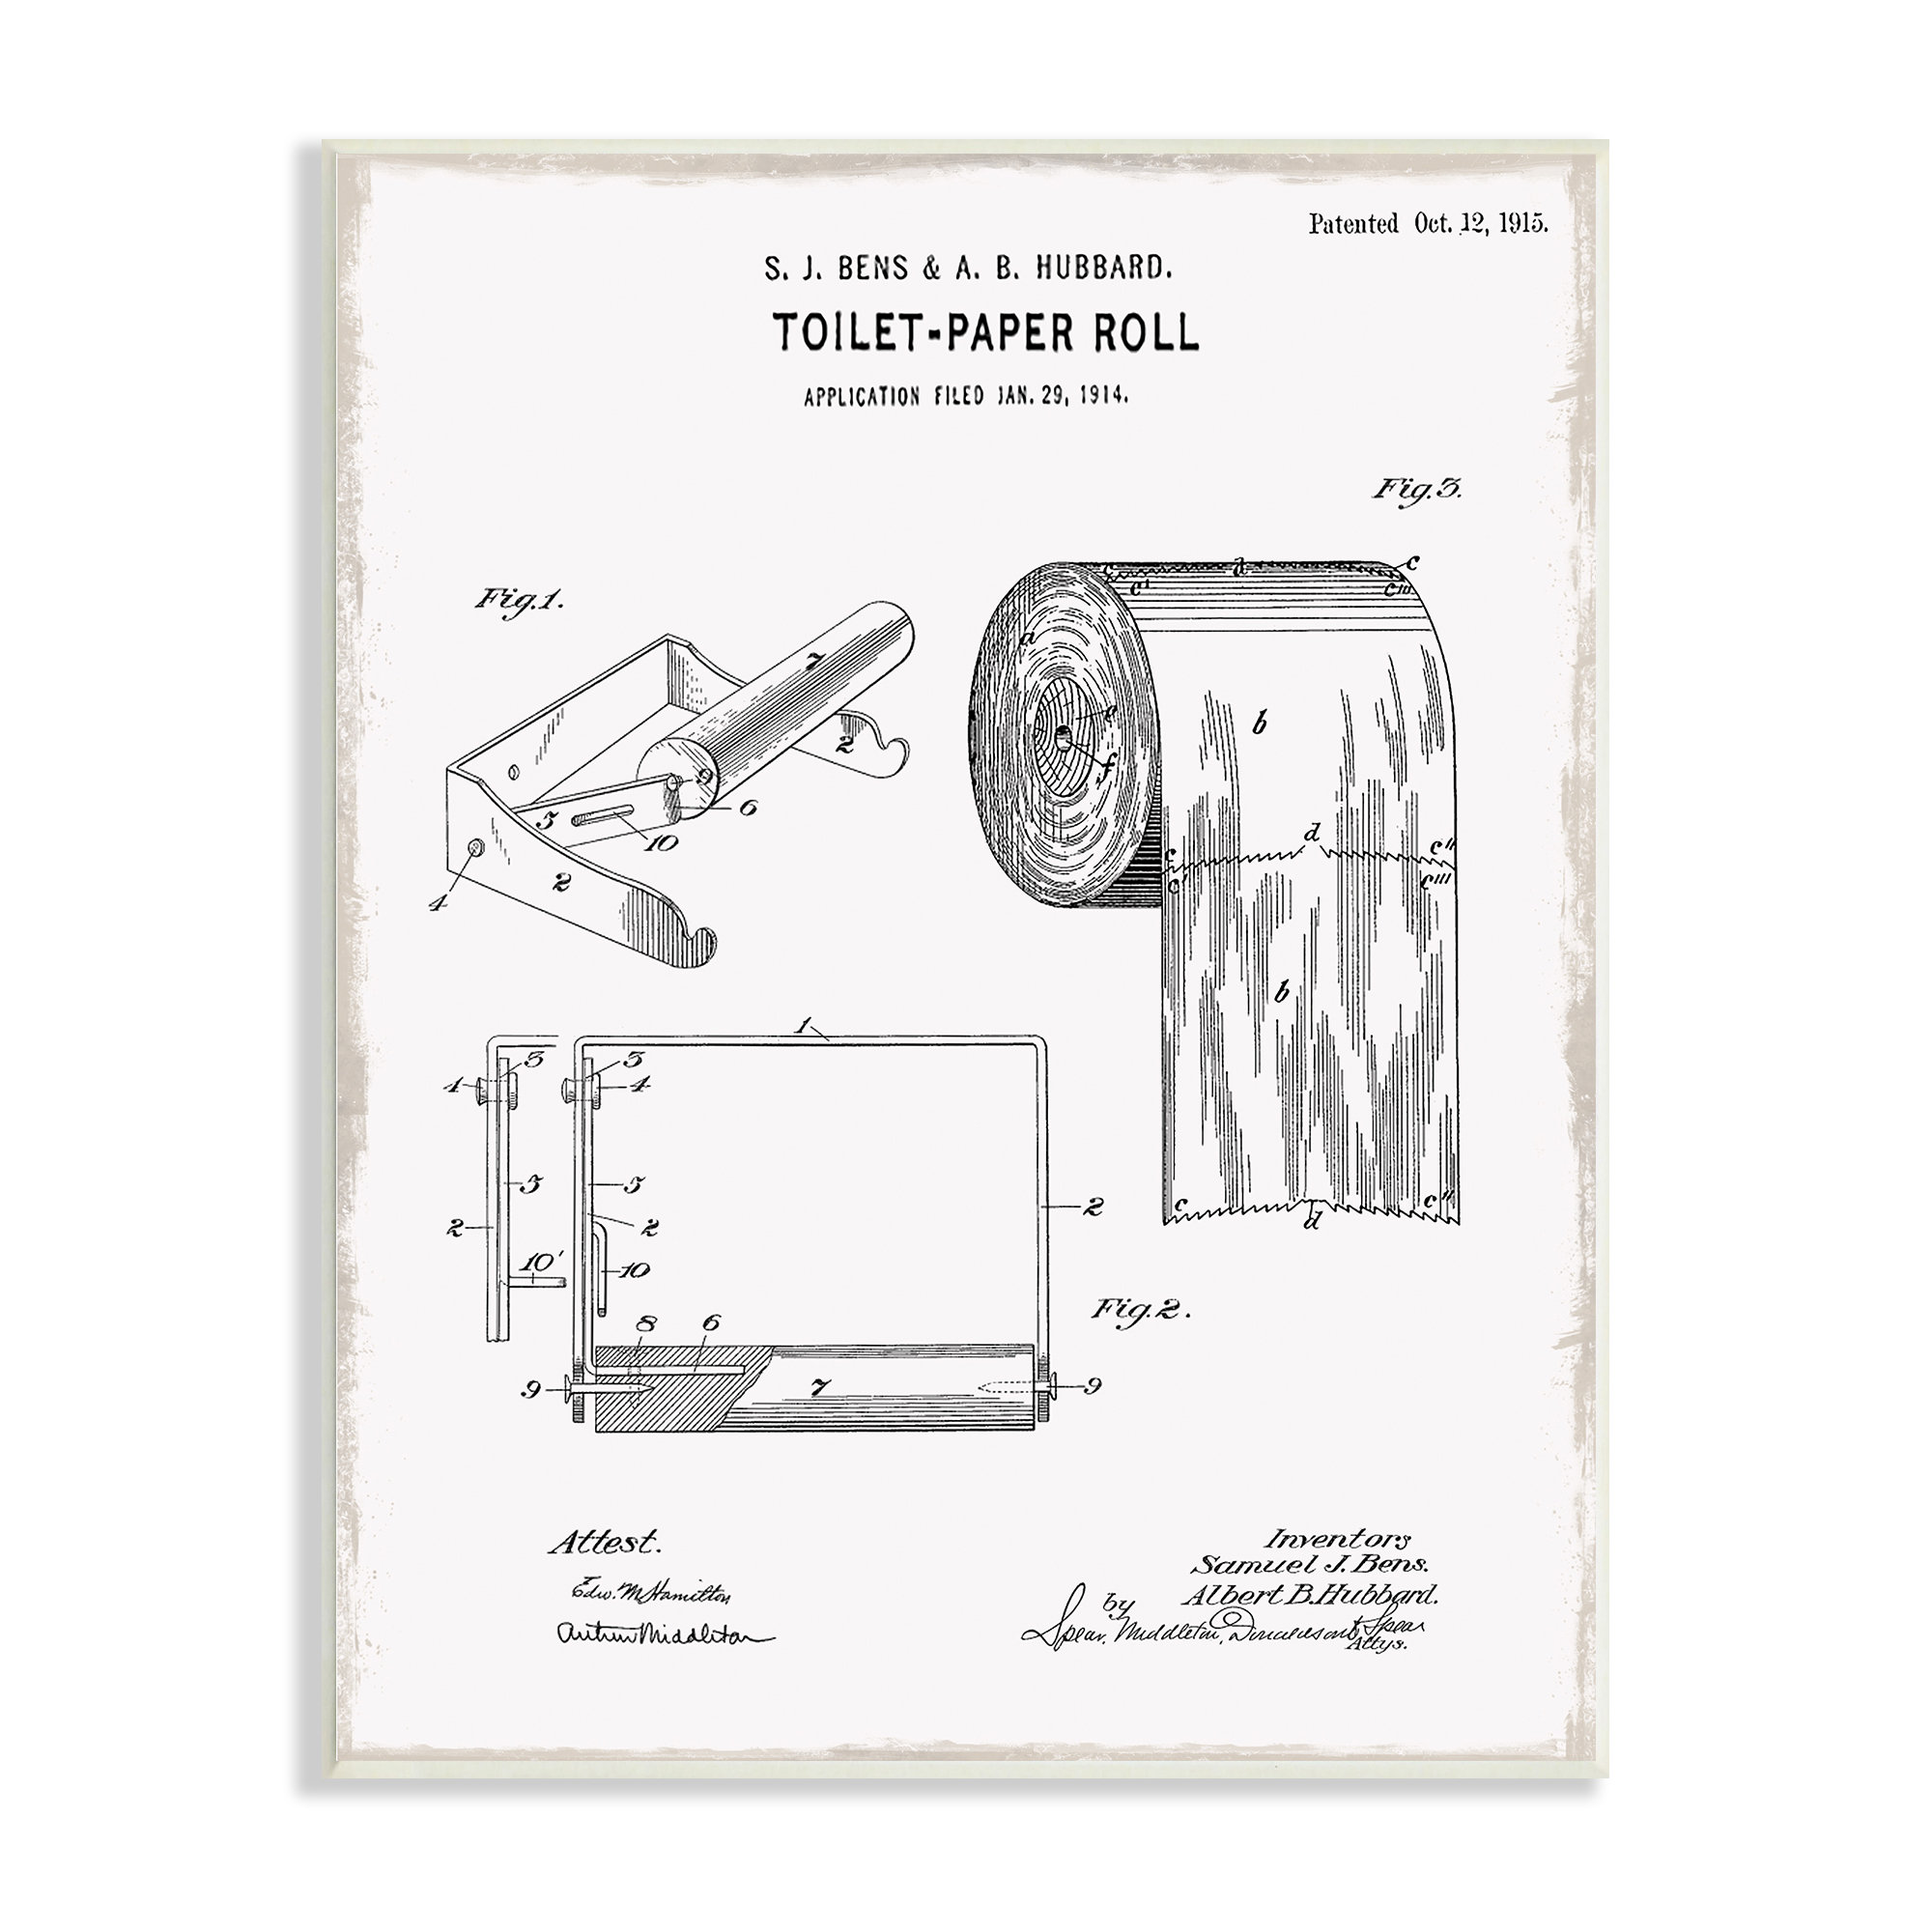 Stupell Industries Toilet Paper Roll Patent Black And White Bathroom  Design by Lettered and Lined 20 in. x 16 in. agp-192_fr_11x14 - The Home  Depot